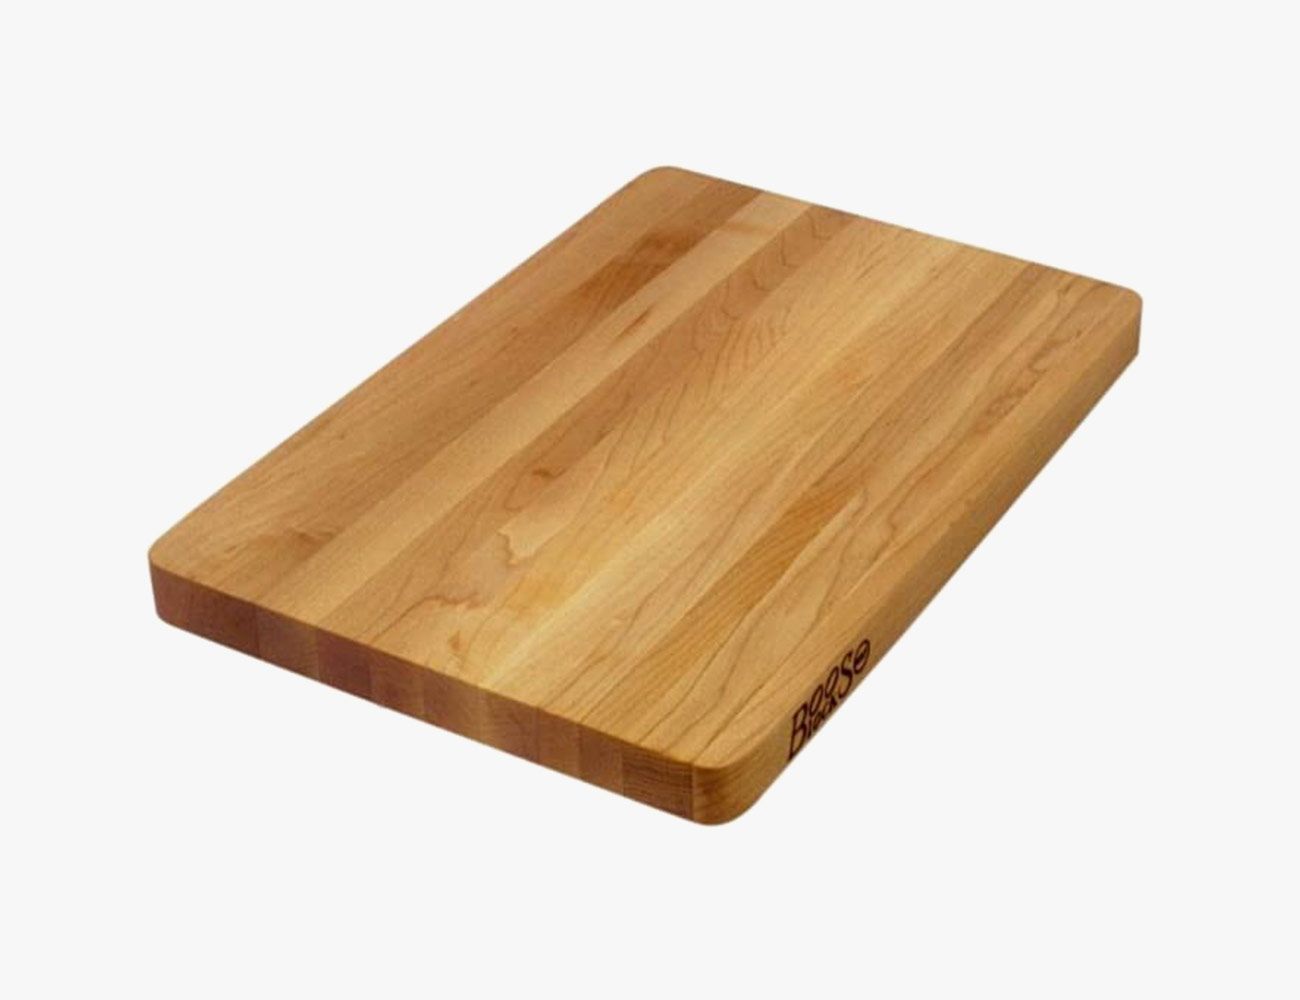 Gear Heads  Which Type of Cutting Board is Best for Your Kitchen